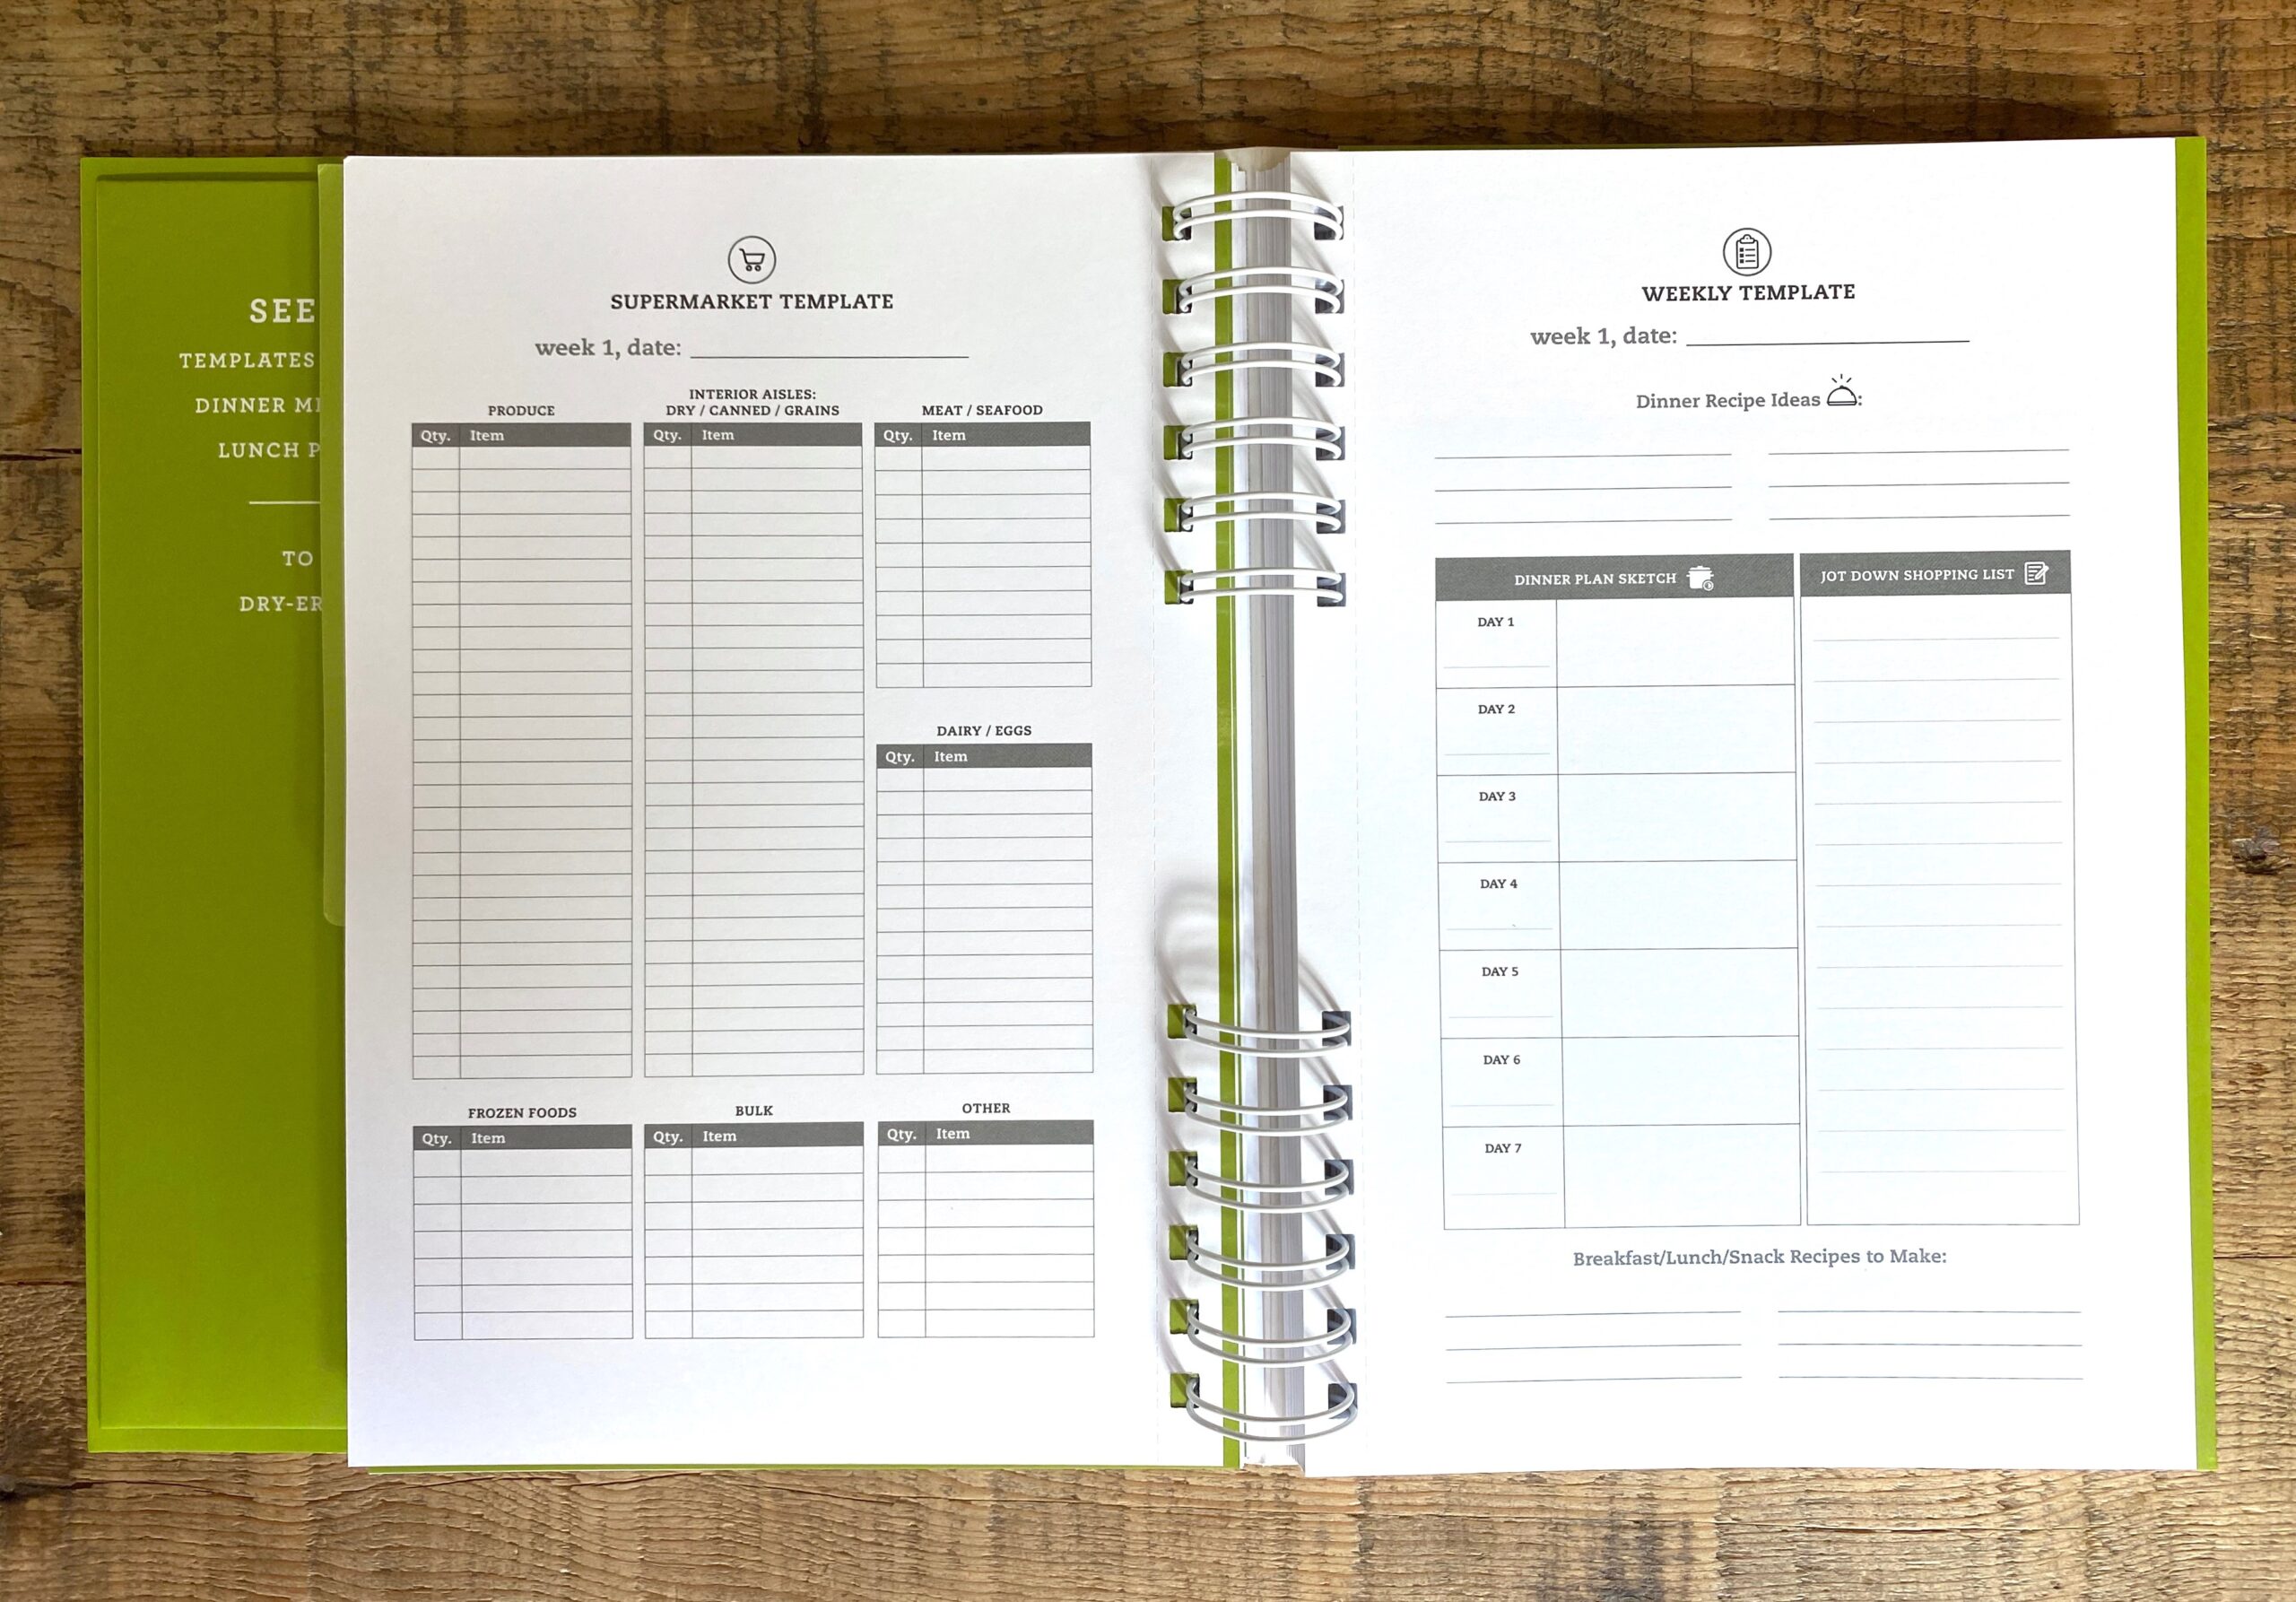 Blank Templates in 100 Days of Real Food Meal Planner